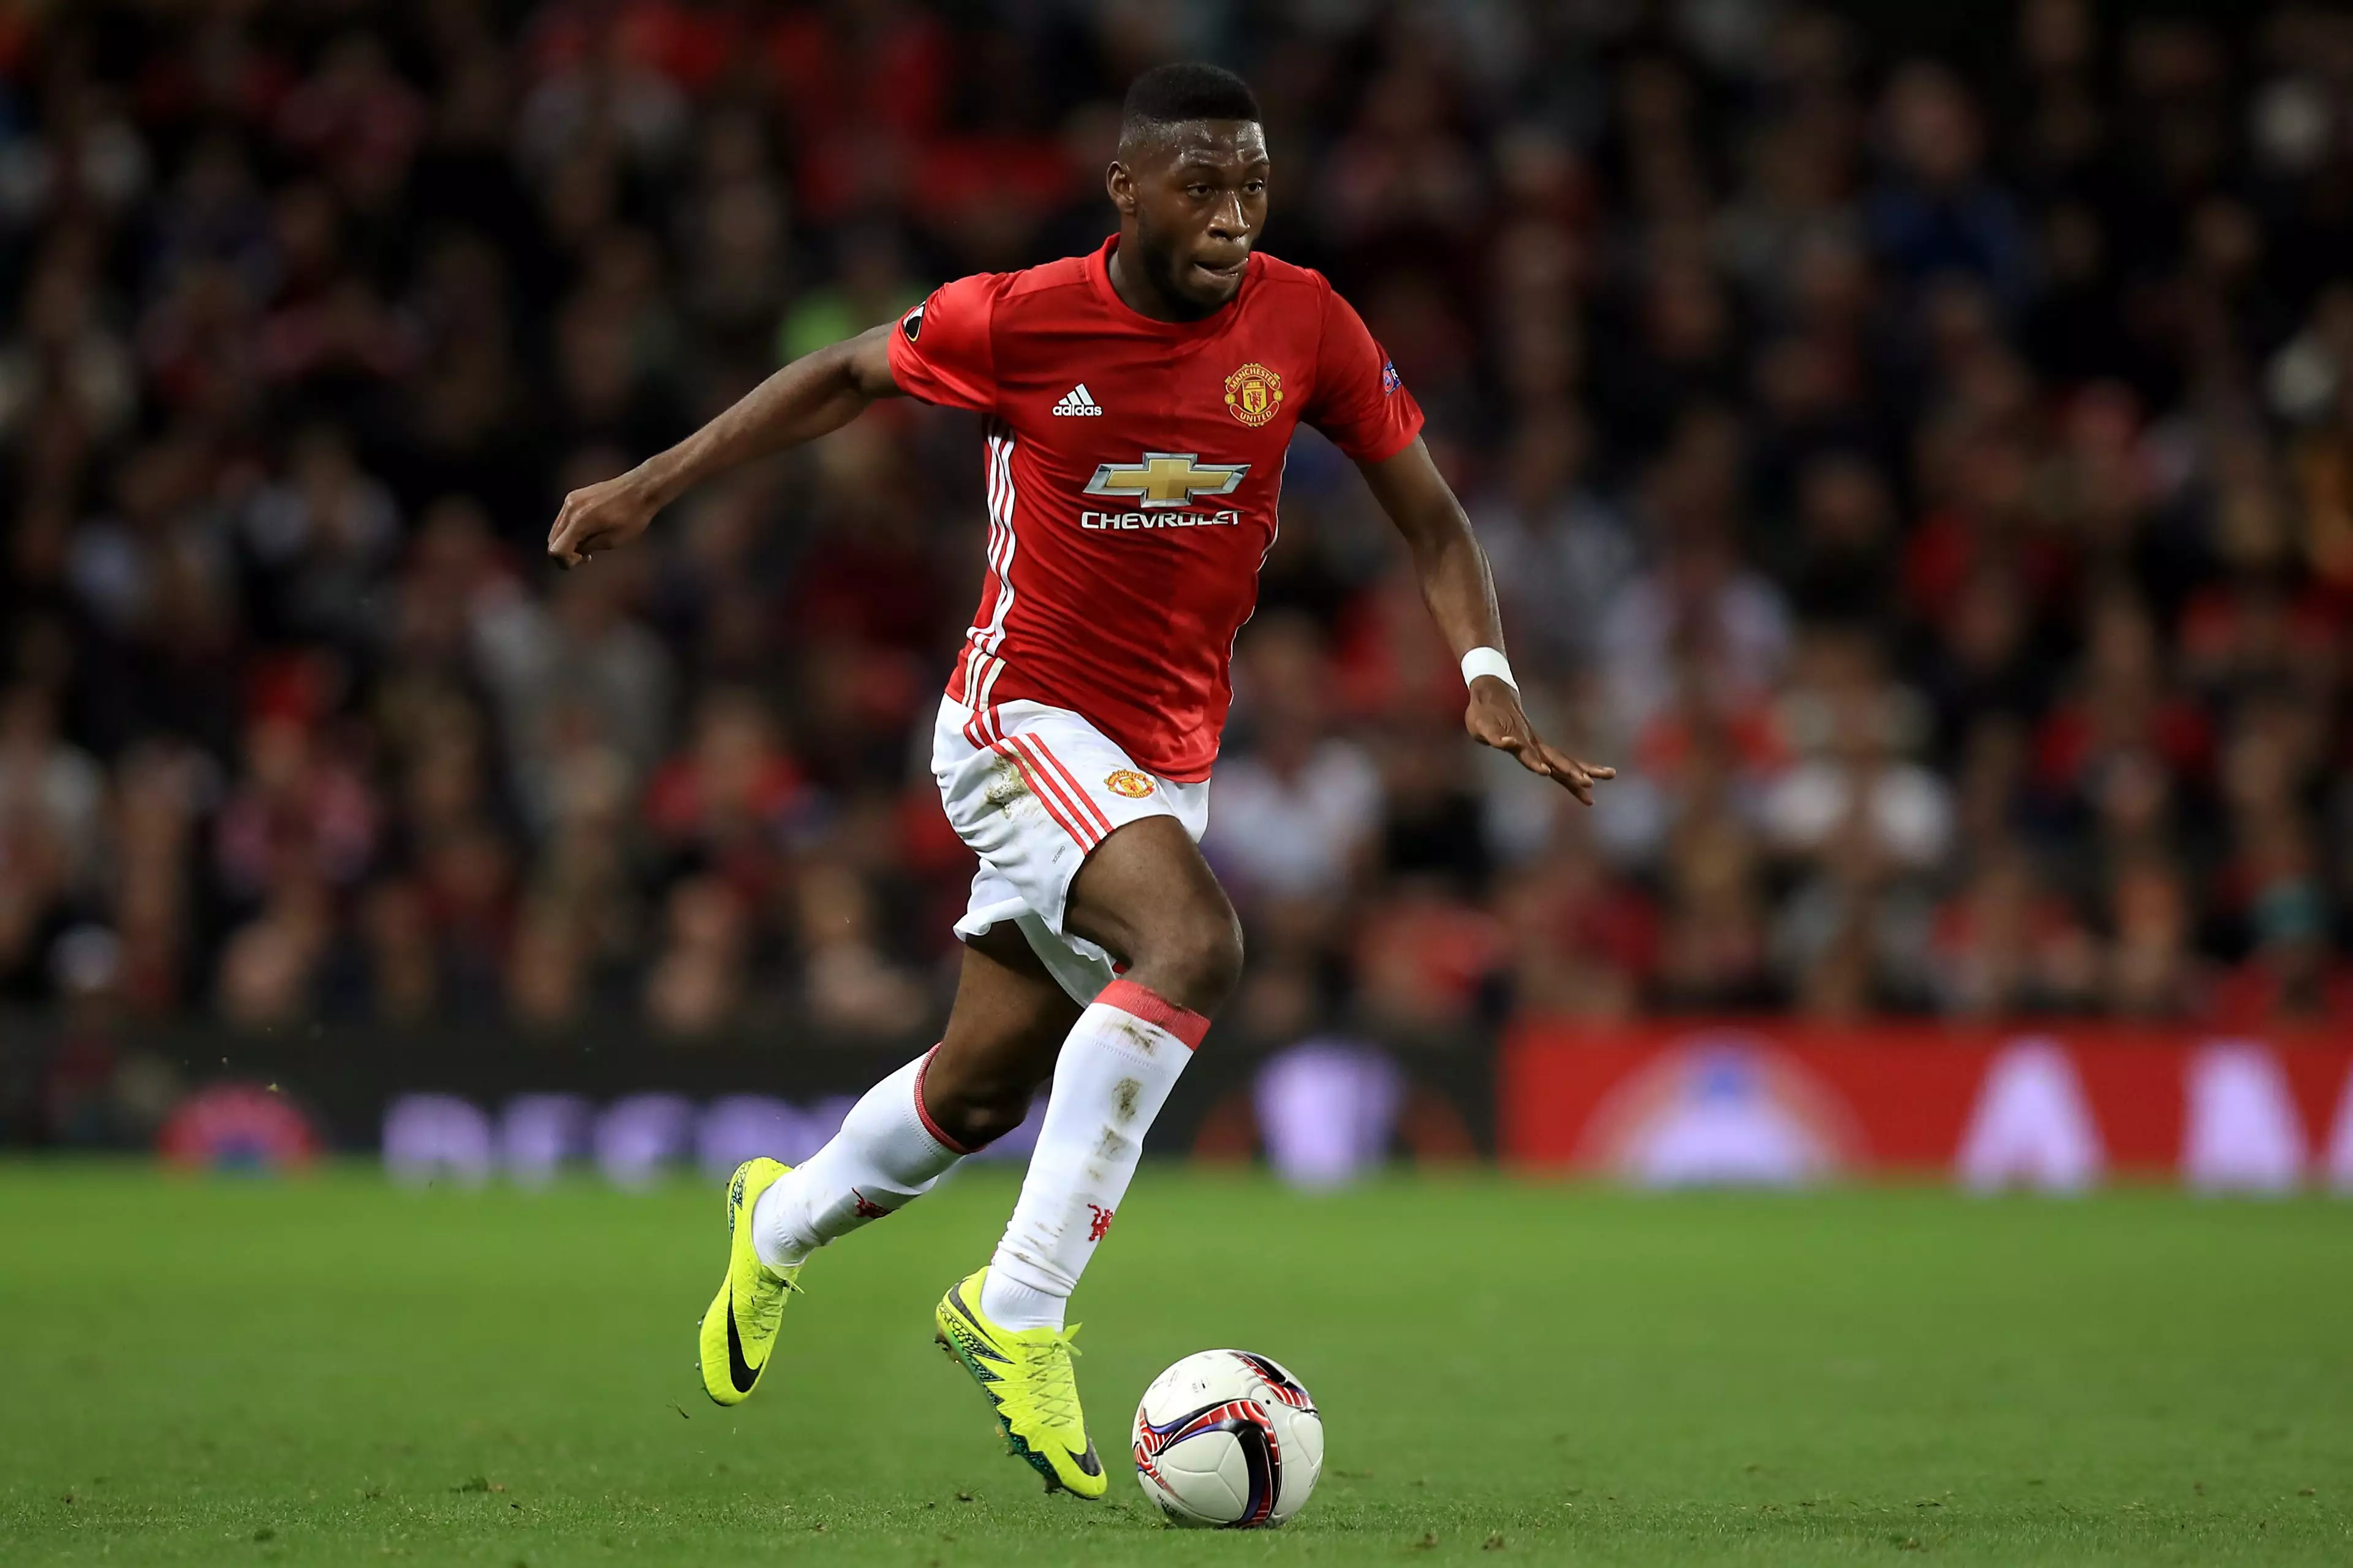 Fosu-Mensah in action for United. Image: PA